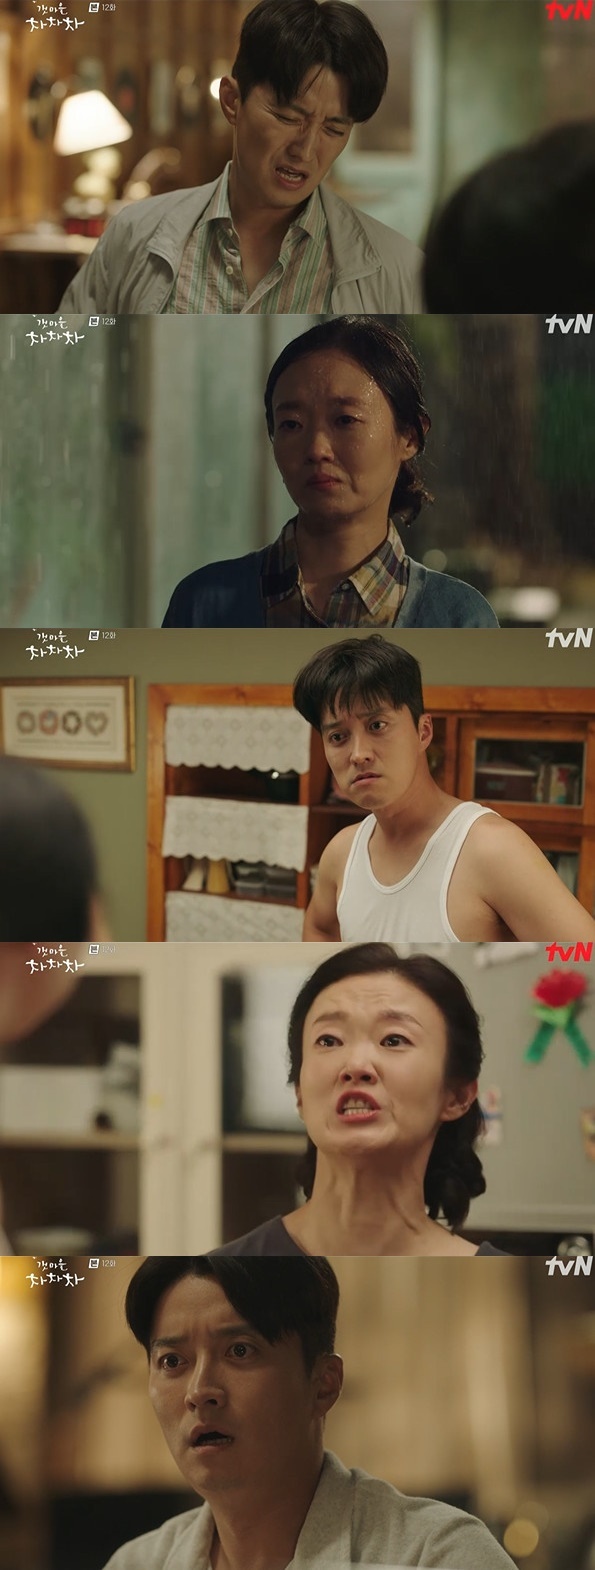 Seoul=) = Gang Village Cha Cha Cha In Gyo-jin and Lee Bong-ryeon have been found to be the reasons for their divorce.In the 12th episode of TVNs weekend drama Gang Village Cha Cha Cha (playplayed by Shin Ha-eun/directed Yoo Jae-won/production studio Dragon/jitist), which aired on the 3rd night, Jang Young-guk (In Gyo-jin) later realized why Yeo Hwa-jeong asked him to divorce her and rebuked himself.The reason for the divorce between Jang Young-guk and Yeo Hwa-jeong was one of the mysteries of the resonant village: they were close to each other after the divorce, but they were also responsible as parents.When Jang Yeong-guks First Love Choe-hee (Hong Ji-hee) returned to the resonance, Yeo Hwa-jeong did not hide her uncomfortable heart.Yeo Hwa-jung was also taking care of Jang Yeong-guks health by asking Jang Yeong-guks colleague Ban Yong-hoon (Kim Sung-bum).Jang Young-guk, who learned this, wondered at the attitude of Yeo Hwa-jung, who was cold to him and took care of him gently behind him.Jang Yeong-guk recalled the past while drinking with Oh Yun (Jo Han-cheol), who was surprised to see Oh Yun, who still missed his widowed wife.Oh Yoon said, You asked the same question two years ago, three years ago.Then Jang Yeong-guk remembered the past days when he had forgotten. In the past, Jang Yeong-guk drank alcohol with Oh Yun.He said to Oh Yoon that marriage is not a great meaning, I was so confused, but First Love left, and just Hwajeong was next to me, so I got married.And my mother died early, and I was sorry that I was alone, he said. Its not really a marriage, theres nothing special, theres nothing so great, so Im just bored to live.Along with Jang Yeong-guk, Oh Yoon-do recalled the memory of Agnaldo Timóteo, who wrote, Hwajeong had come to pick you up.It was a rainy day, so I came to give an umbrella, but I was all in the rain. So, Jang Yeong-guk realized later that Yeo Hwa-jeong had heard all that Agnaldo Timóteo had said.The day after drinking, I realized that the fact that Yeo Hwa-jung was angry with the minor reason of turning the socks over was actually an expression of hurtful heart.Jang Yeong-guk found out that it was all his fault and committed suicide.How will their relationship change, as the reason for the divorce of the two is revealed.It is an important point of observation of Gang Village Cha Cha Cha Cha how Jang Young-guk, who still has a heart for Jang Young-guk, and how Jang Young-guk, who realized his mistake, will change.